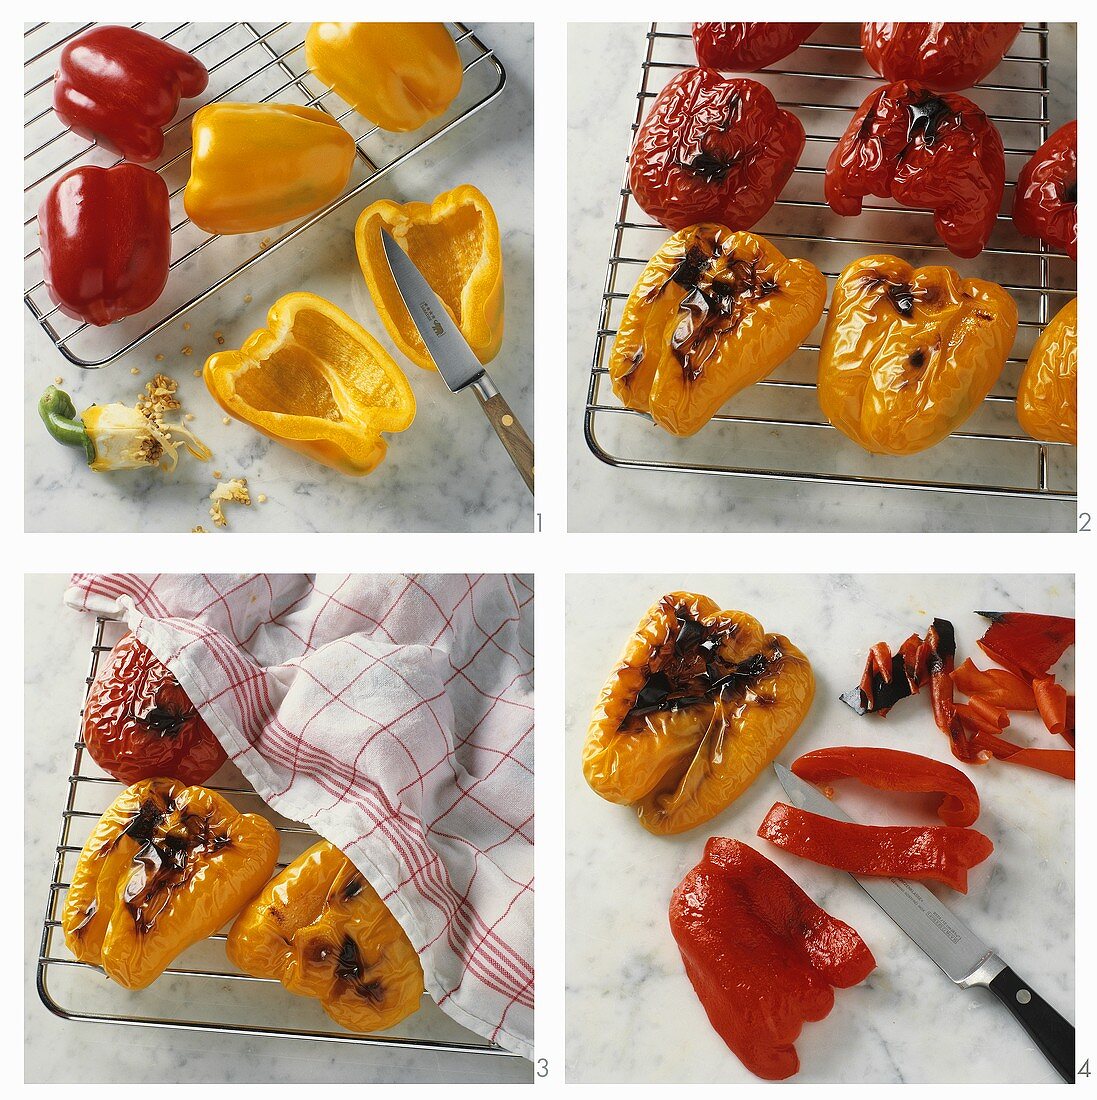 Grilling and skinning red and yellow peppers